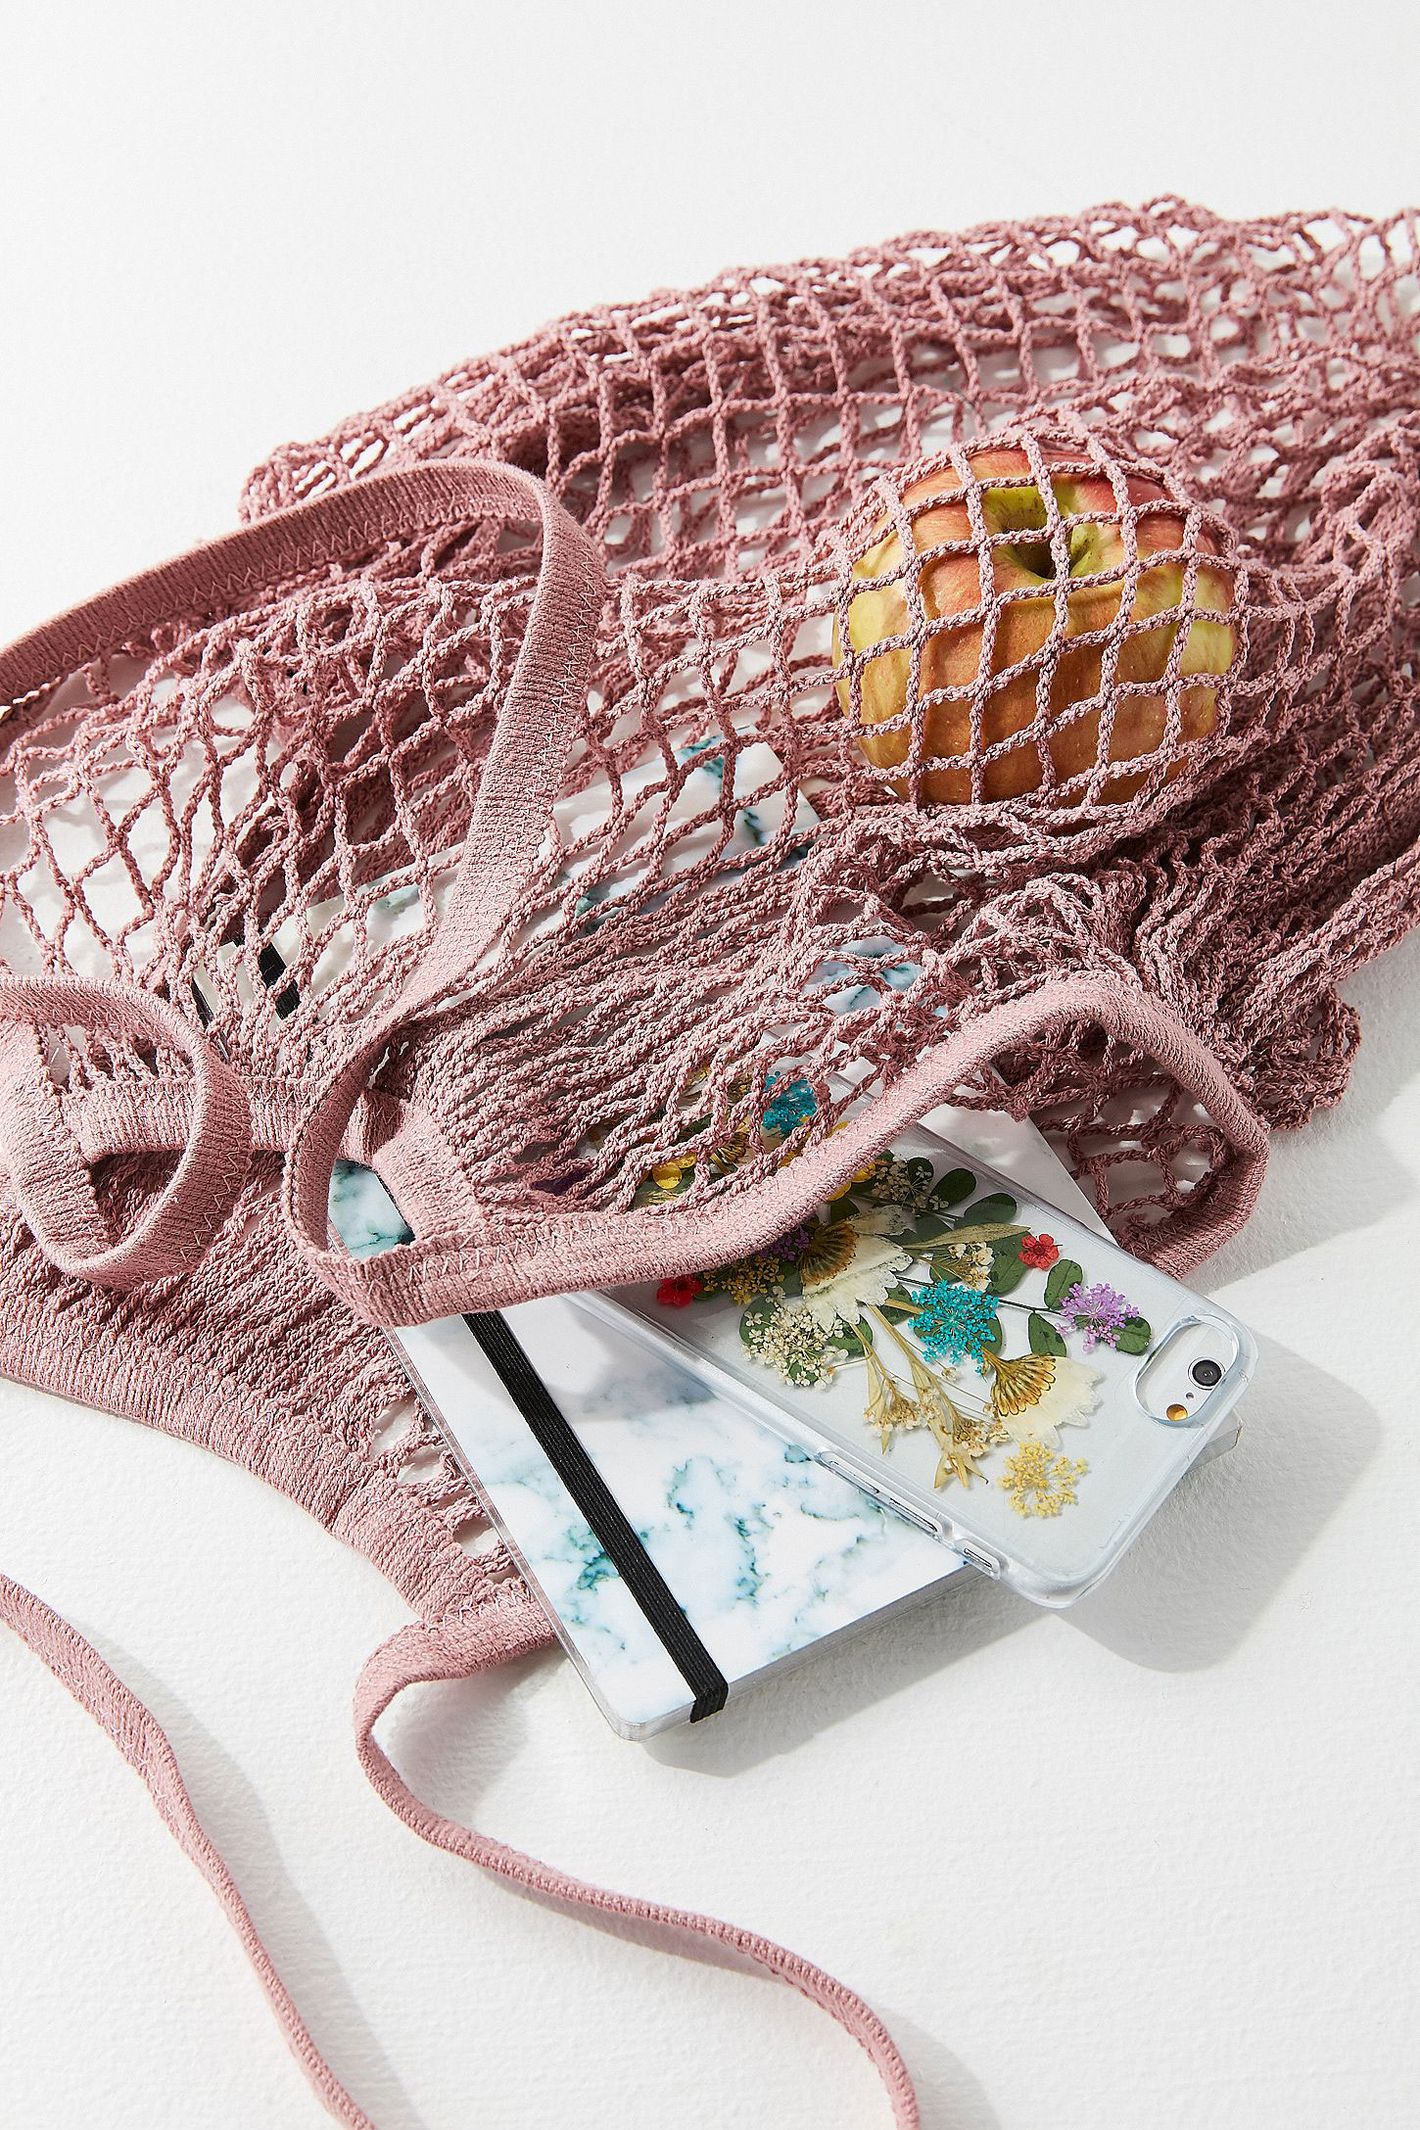 The Next Status Tote Might Just Be the $5 Fisherman Net Bag